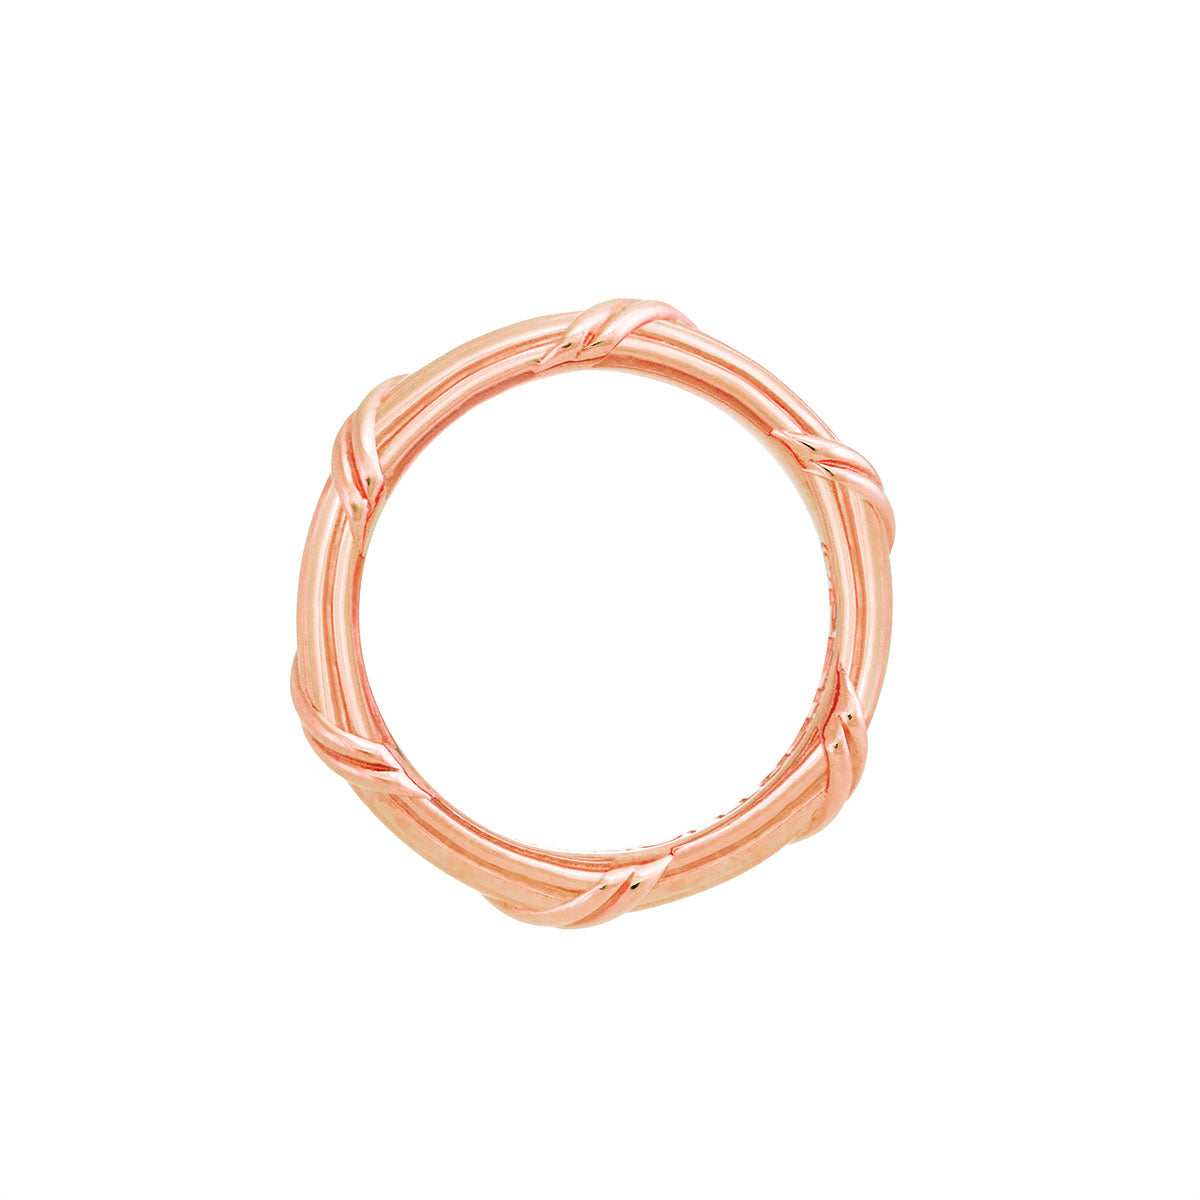 Heritage Eternity Band in 18K rose gold 3 mm sizes 4 - 9